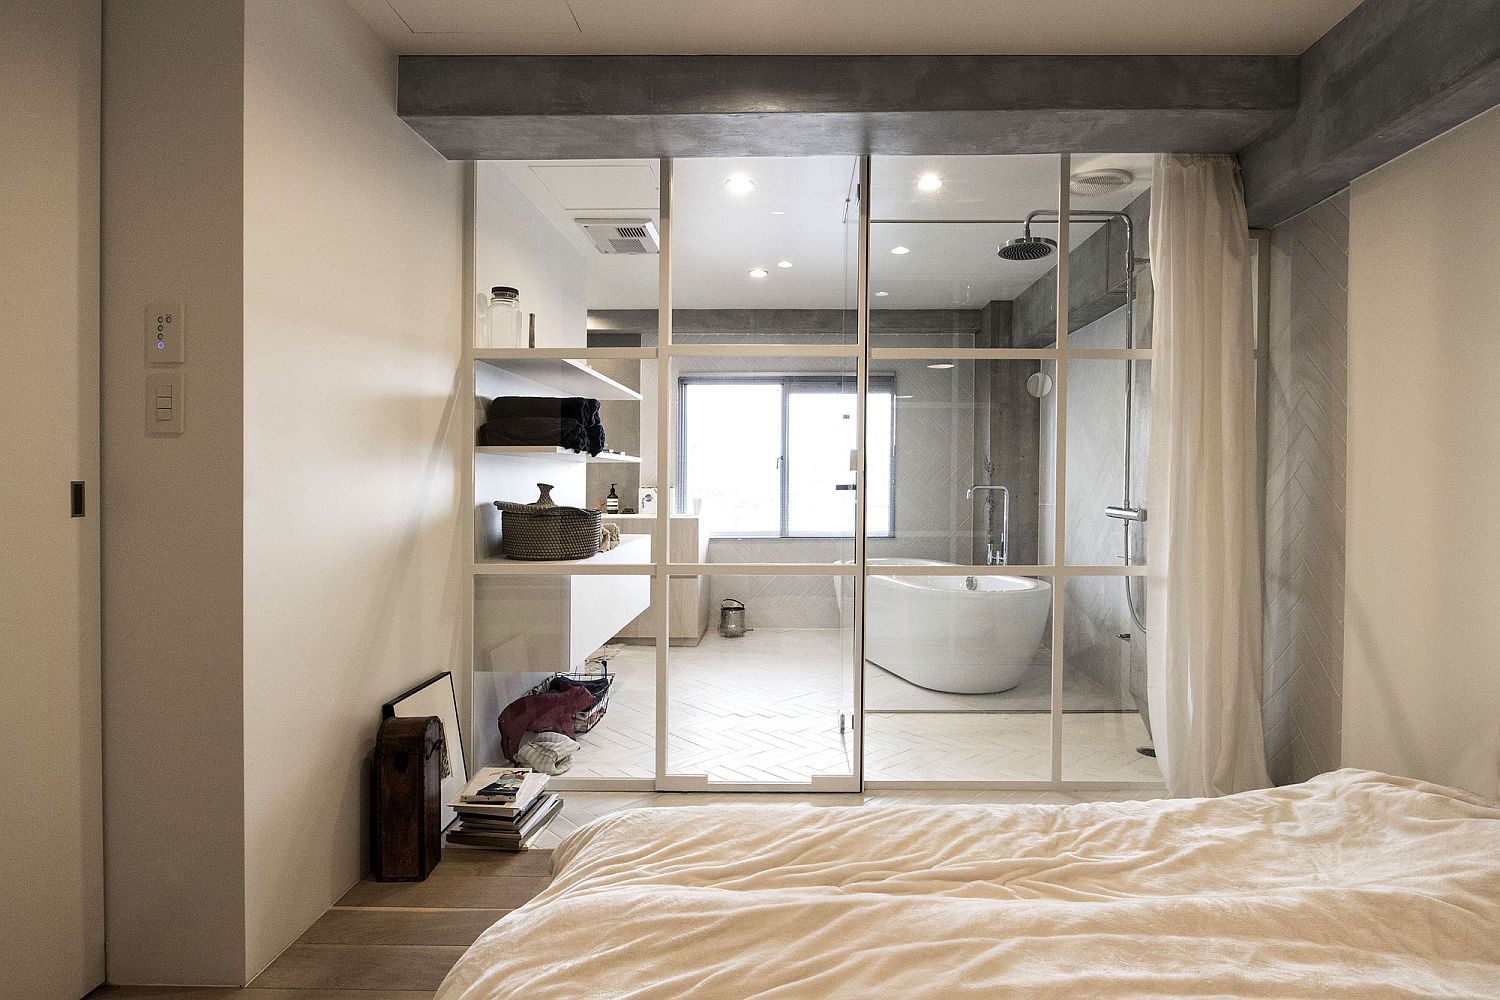 Bedroom-and-bathroom-separated-using-framed-glass-wall